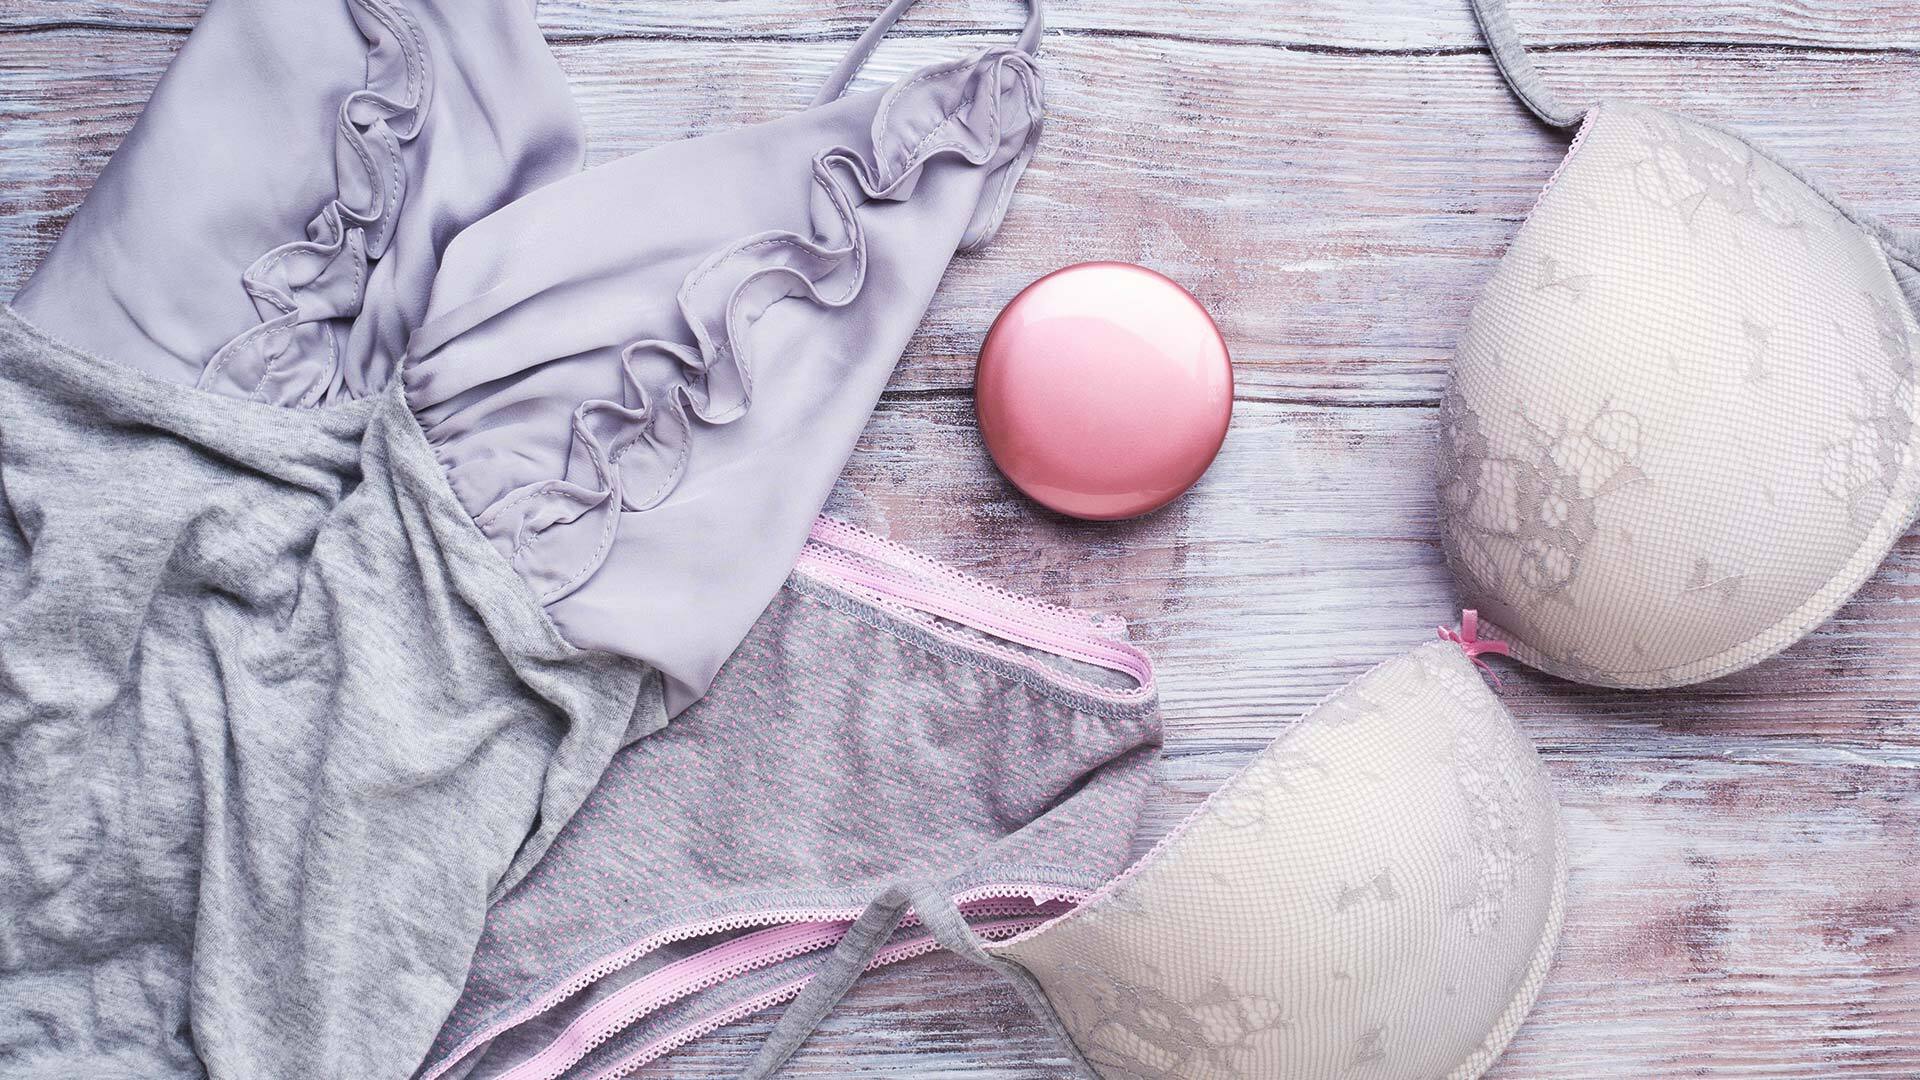 Best low-ticket products to dropship - sleepwear